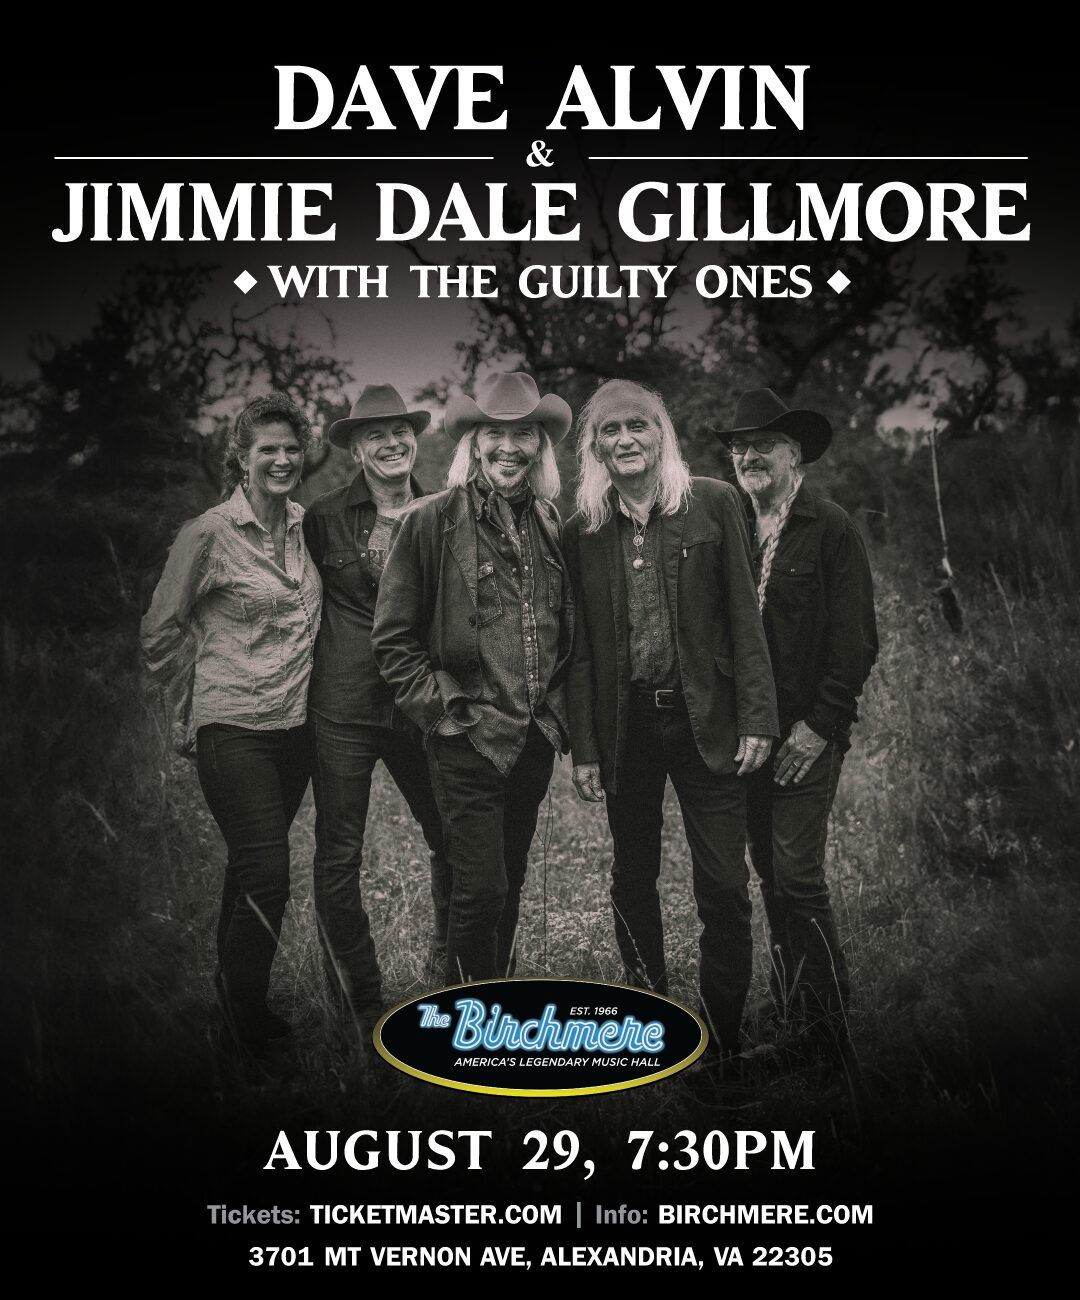 Dave Alvin and Jimmie Dale Gilmore and The Guilty Ones